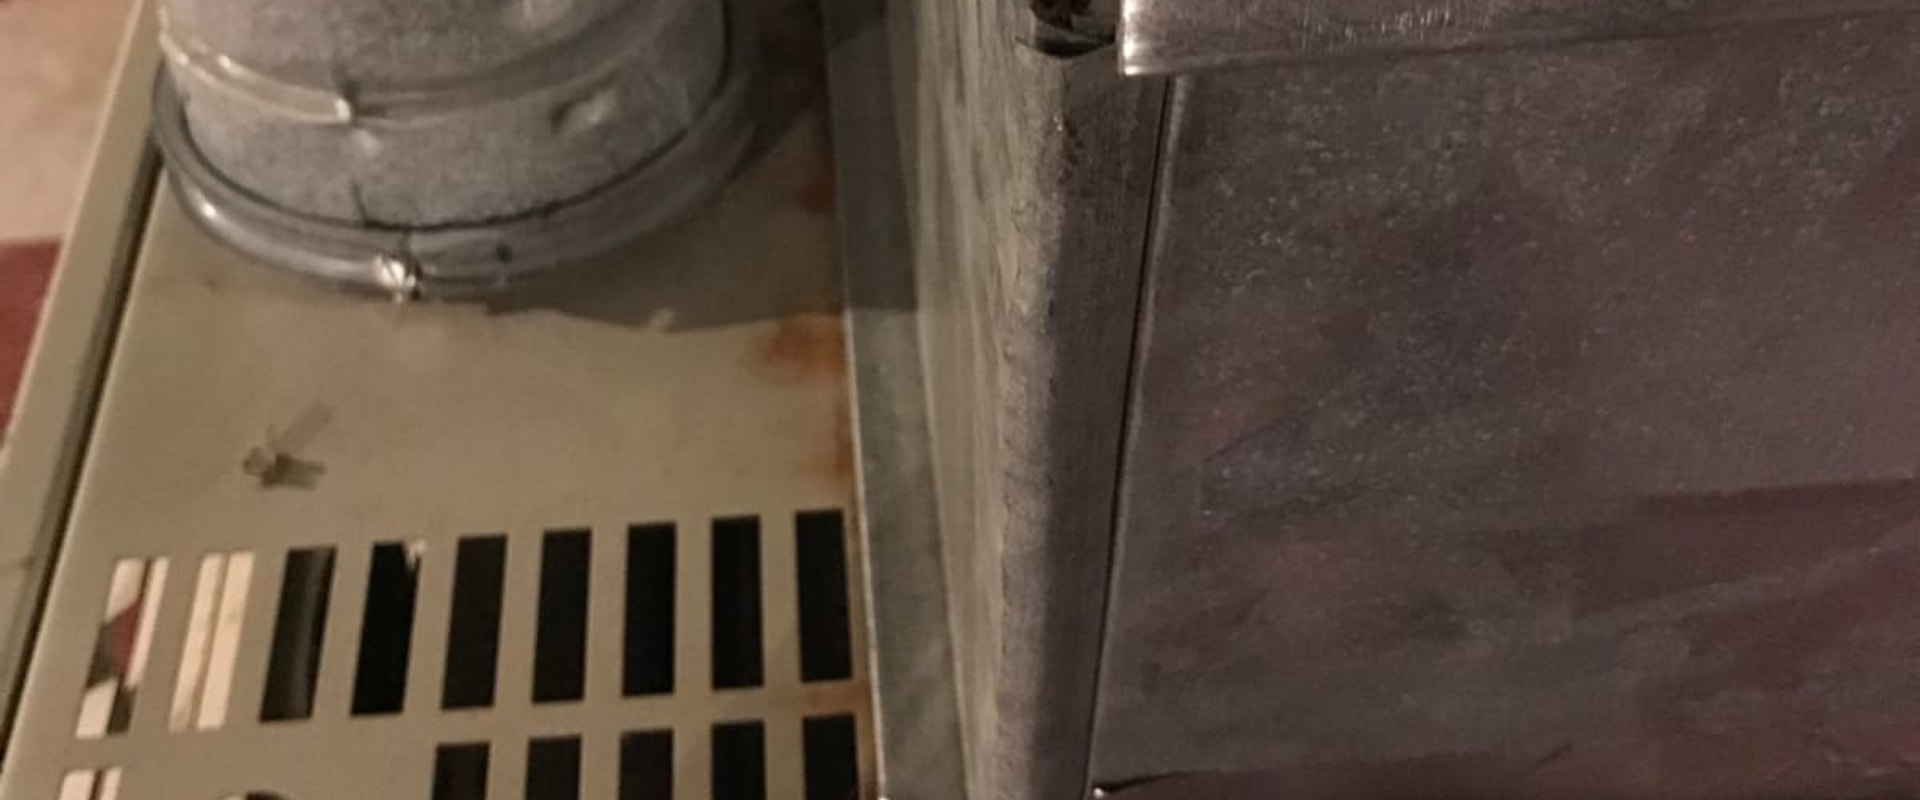 How do you seal gaps in hvac?